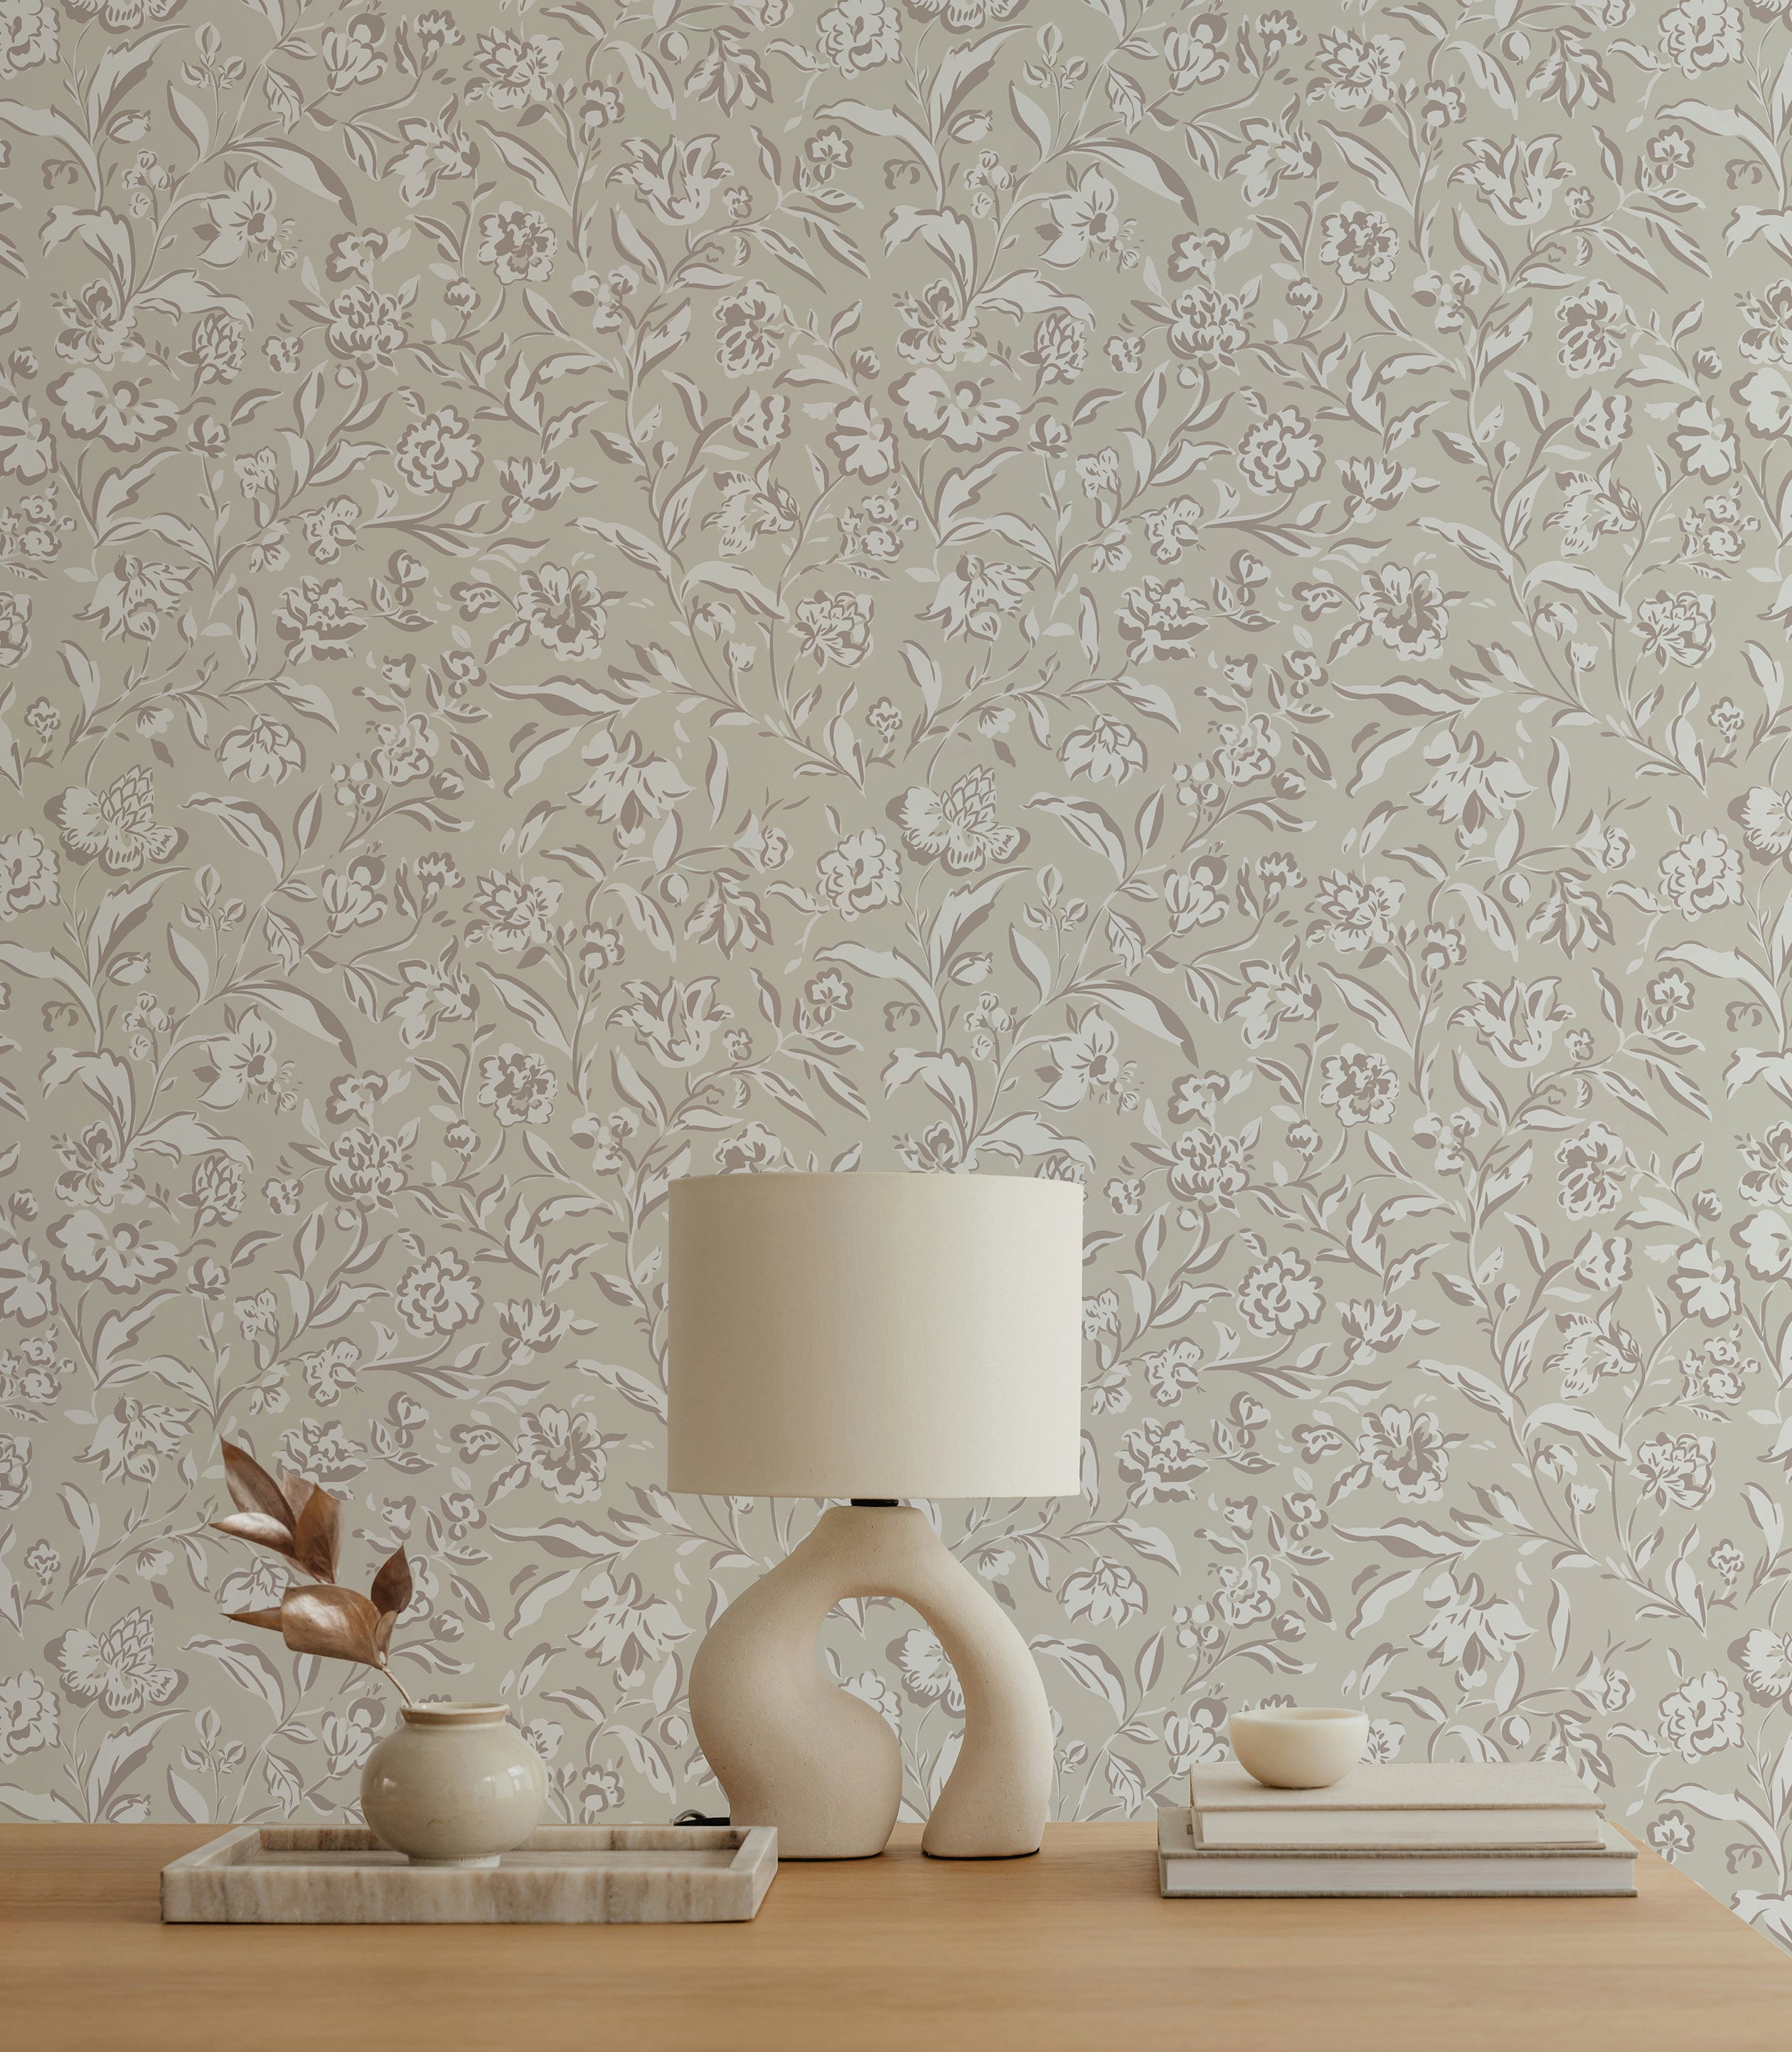 A close-up view of the Boho Sketchy Floral Wallpaper, highlighting its intricate design of delicate flowers and leaves in a monochrome beige palette. The detailed sketch style brings a modern yet timeless feel to any room.